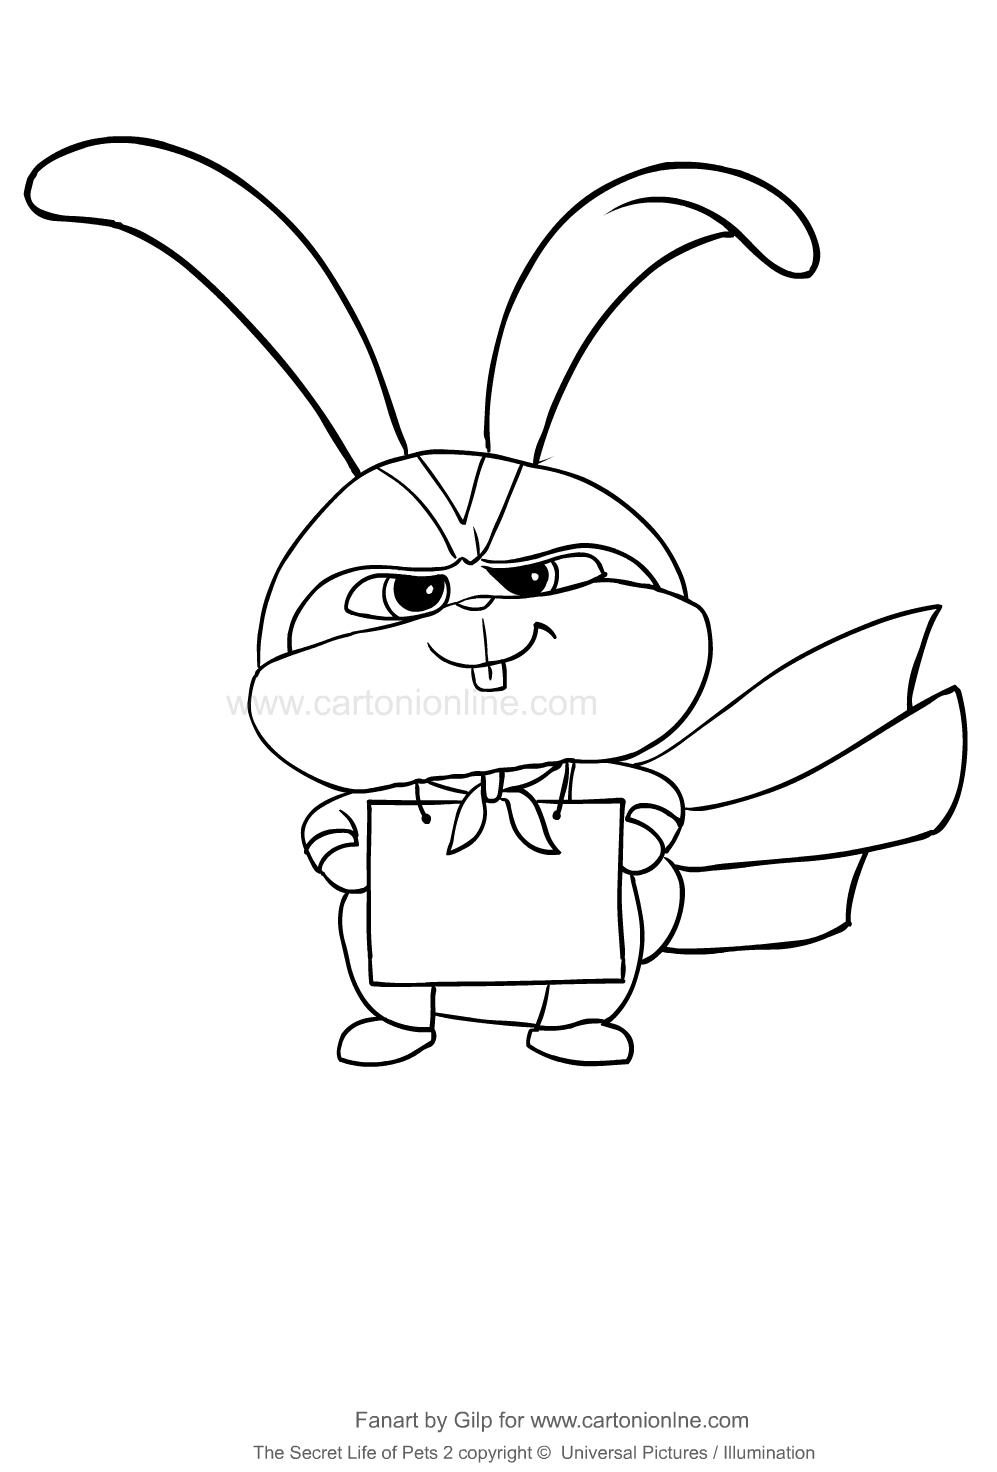 Snowball from The Secret Life of Pets 2 coloring page